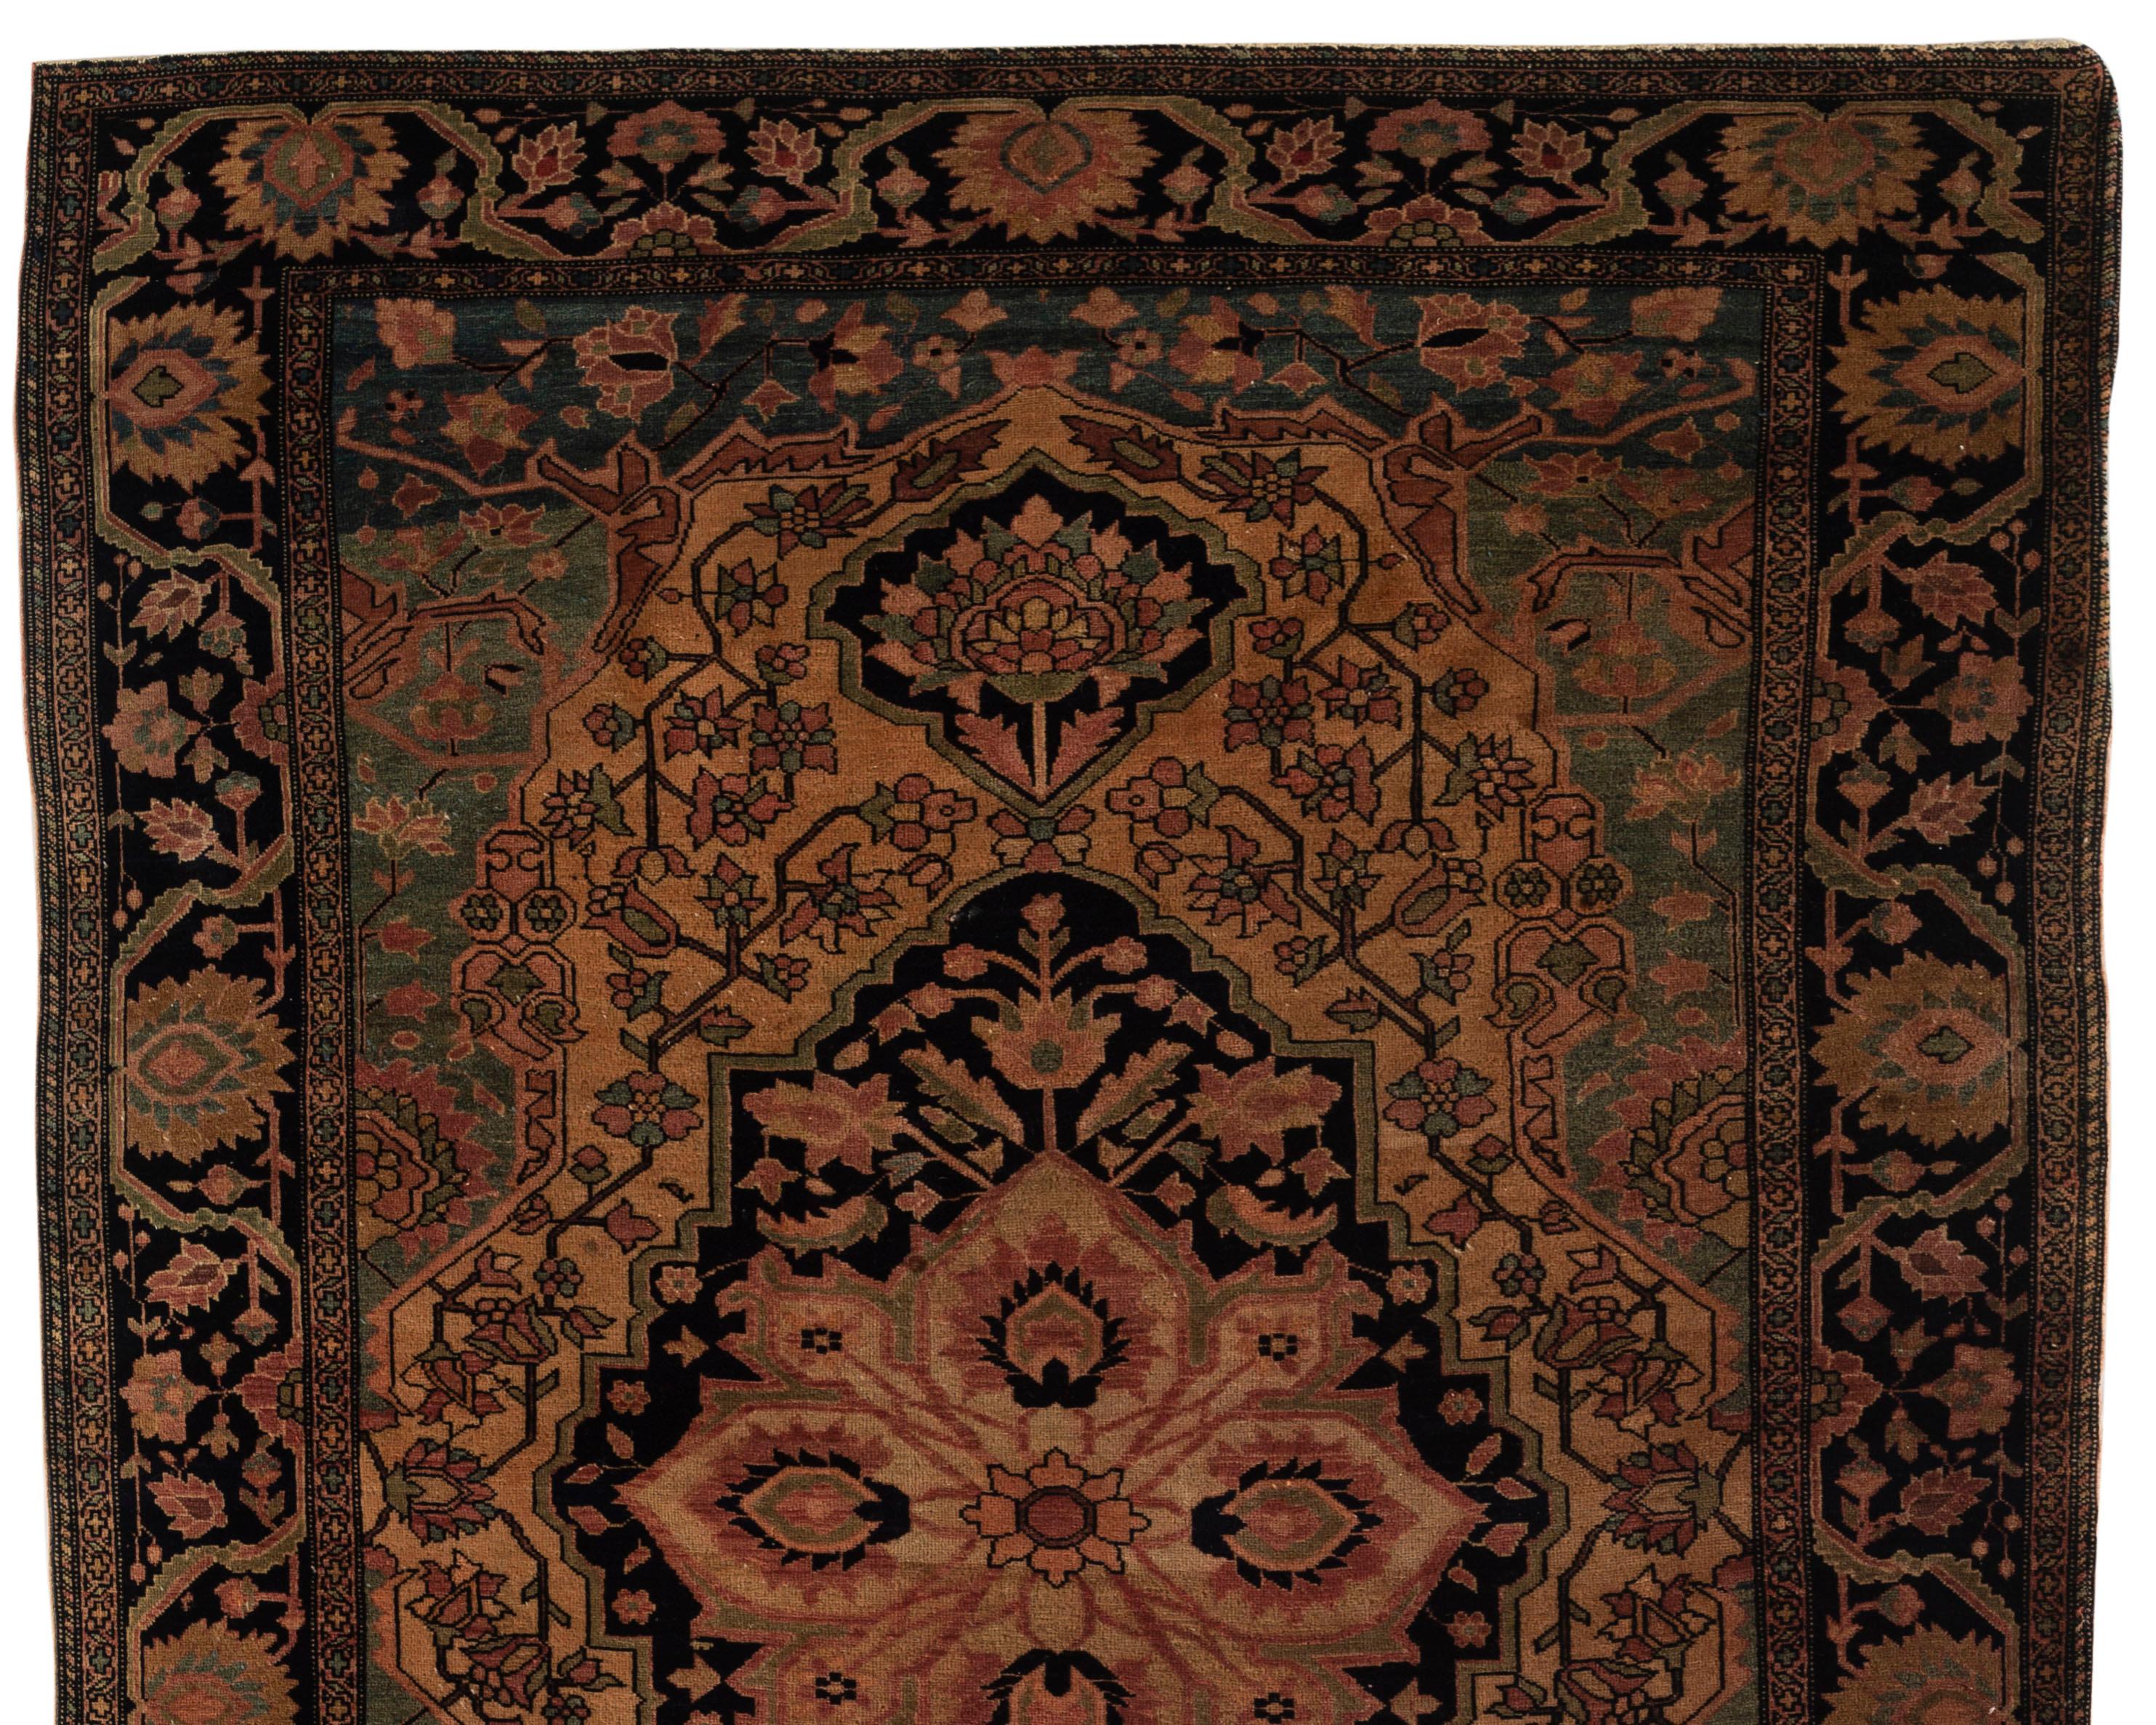 Antique Persian Farahan Sarouk rug, circa 1880. Sarouk rugs come from west central Persia. A small rug but with a lot of detail woven into the rug by truly skilled weavers to create a true work of art. Size: 4'1 x 6'10